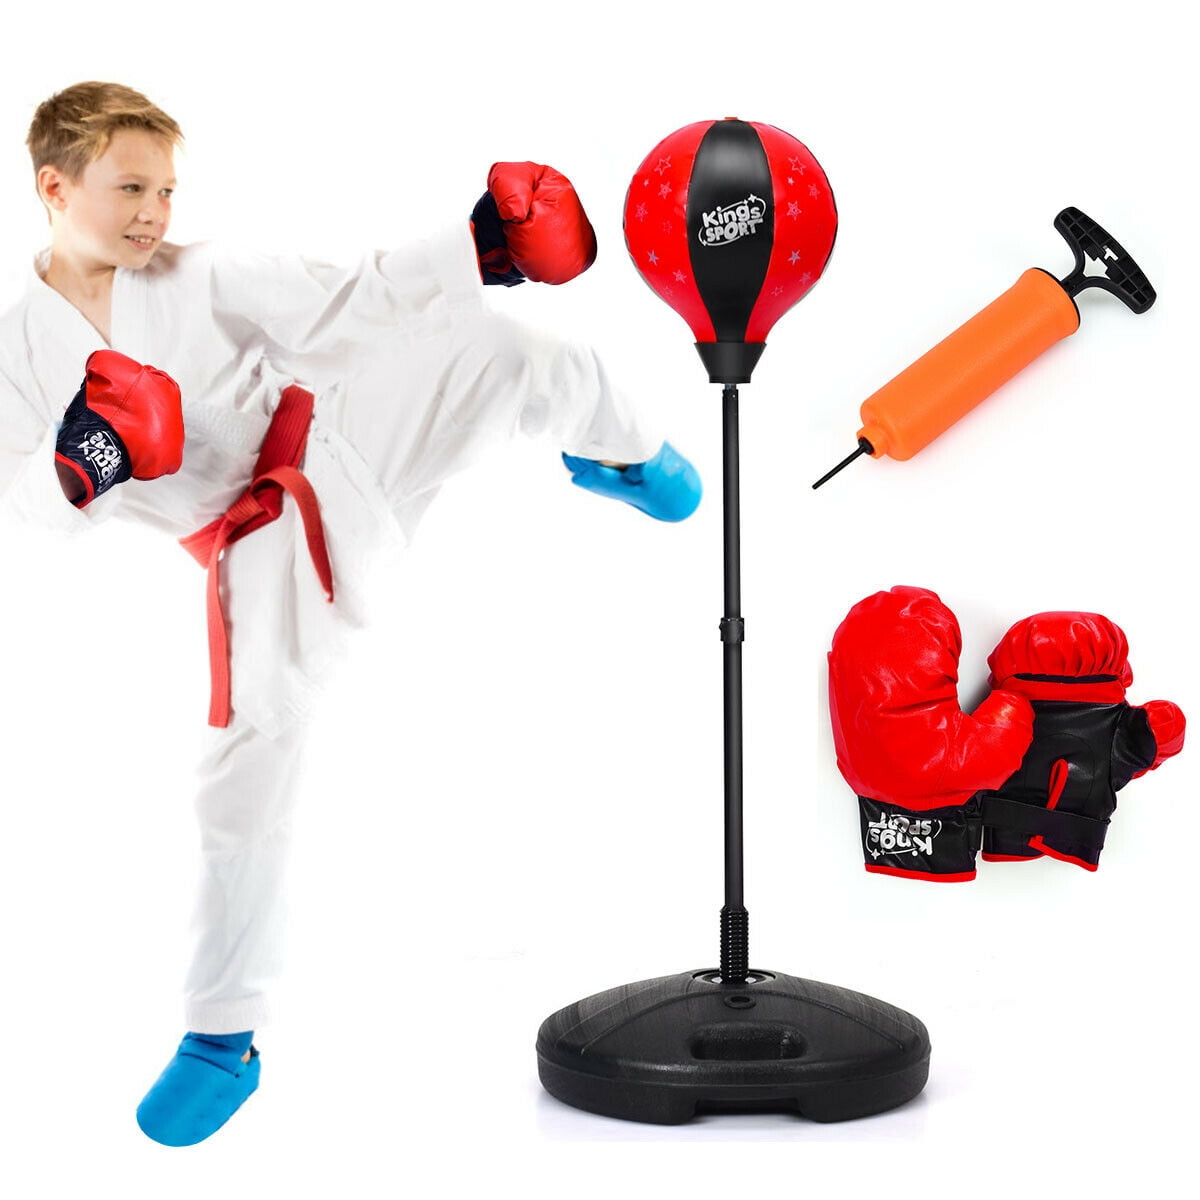 DURABLE PUNCH BAG BALL AND MITTS GLOVES KIT BOXING GIFT SET FOR KIDS FREE STAND 